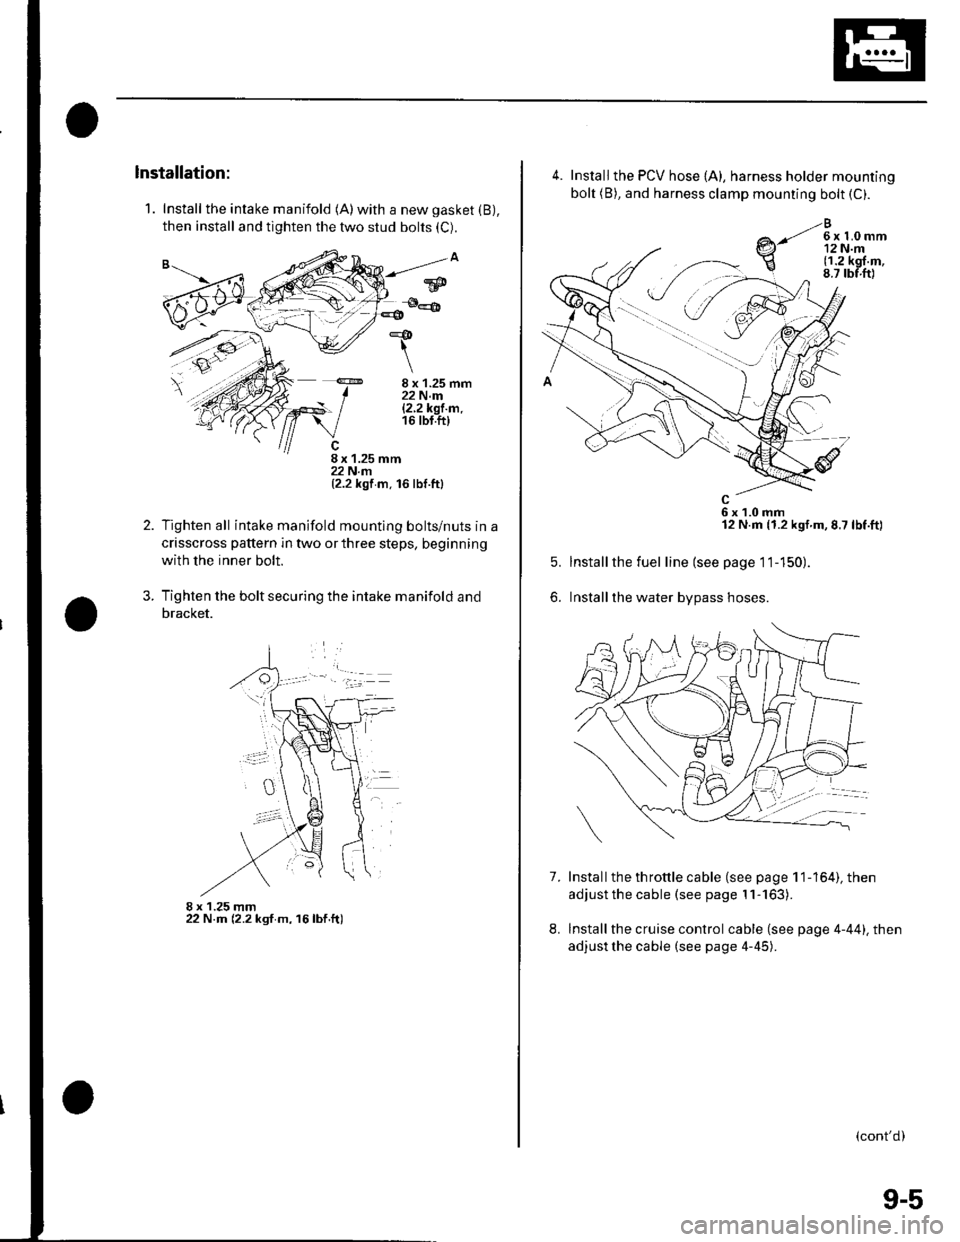 HONDA CIVIC 2003 7.G Workshop Manual 1. Install the intake manifold (A)with a new gasket (B),
then install and tighten the two stud bolts (C).
8 x 1.25 mm22 N.m|.2.2k91.m.16 tbt.ft)
8 x 1.25 mm22 N.rn(2.2 kgf m. 16 lbf.ttl
Tighten all in